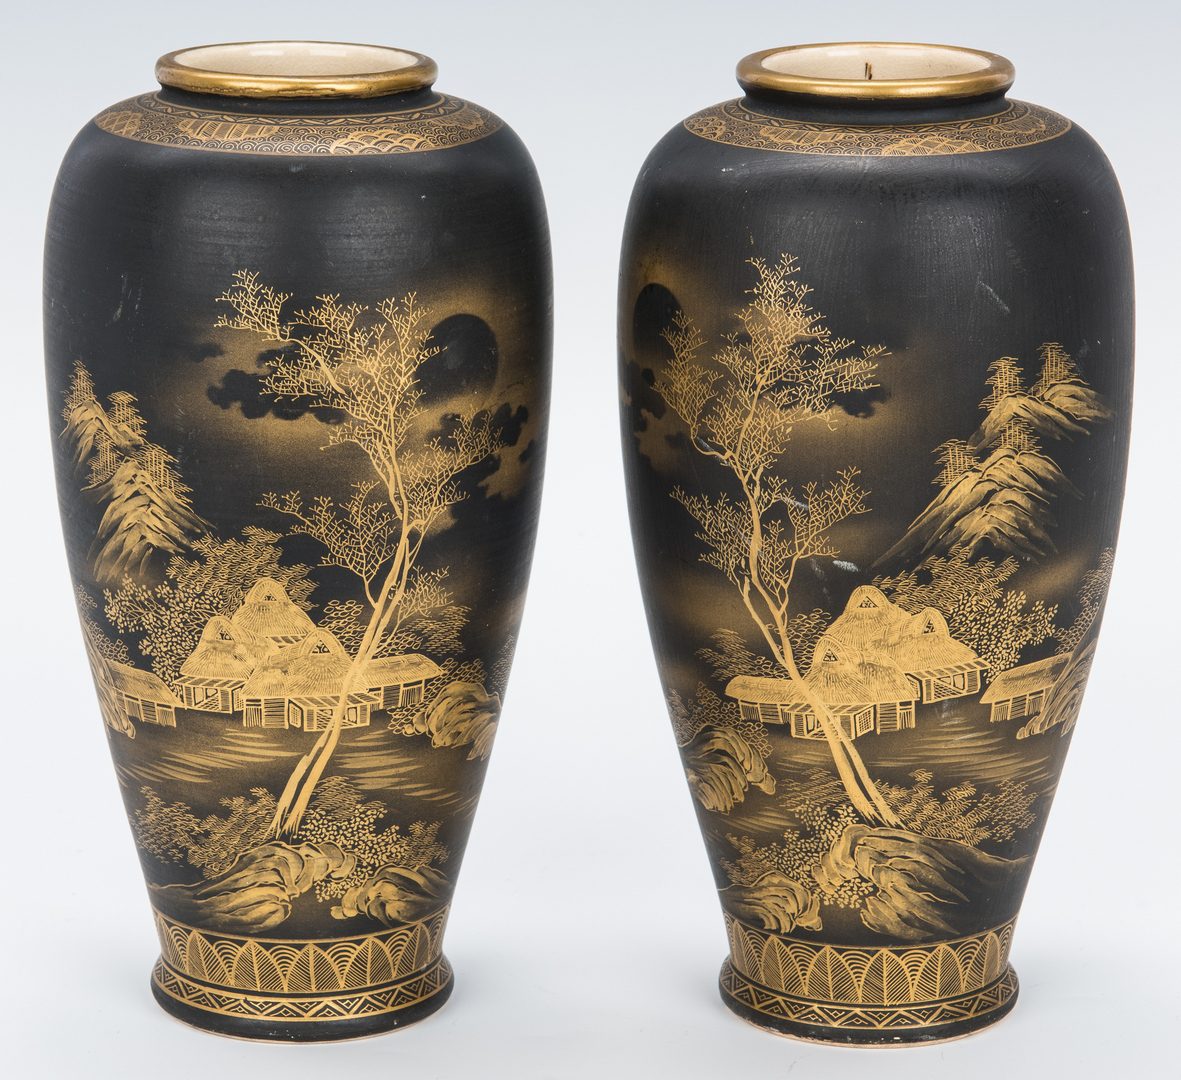 Lot 16: Pair of Black Satsuma Vases and Plate